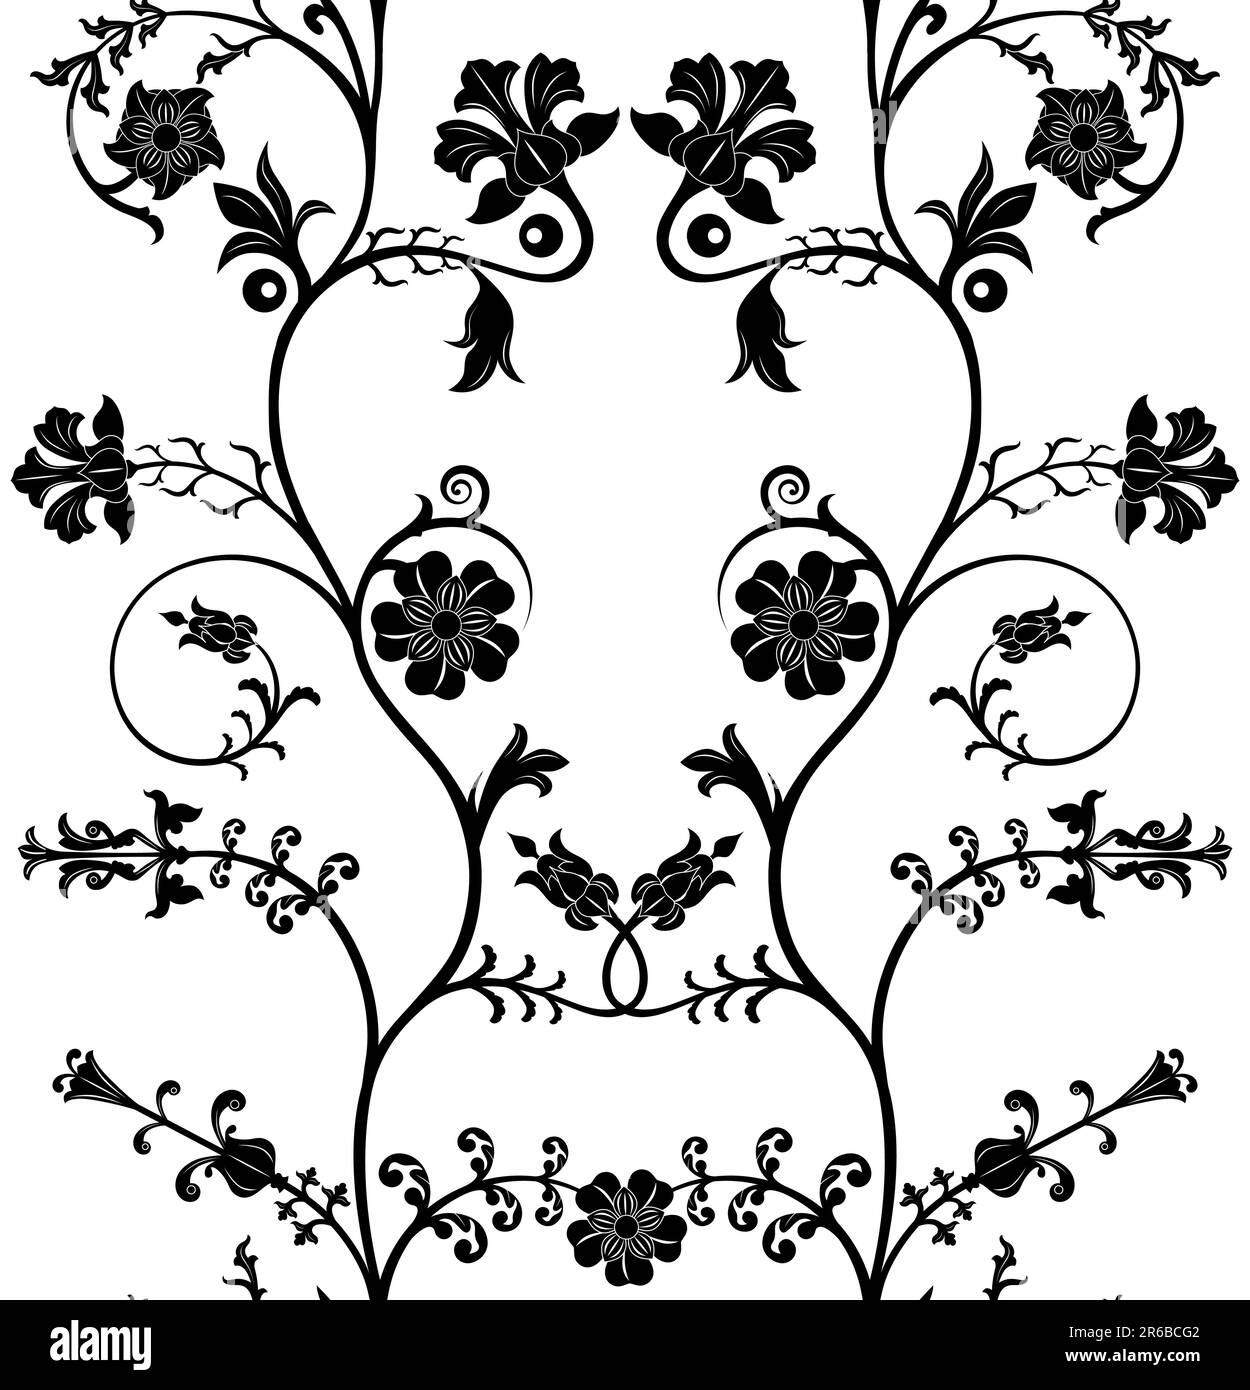 Vector seamless floral pattern on white background. Stock Vector